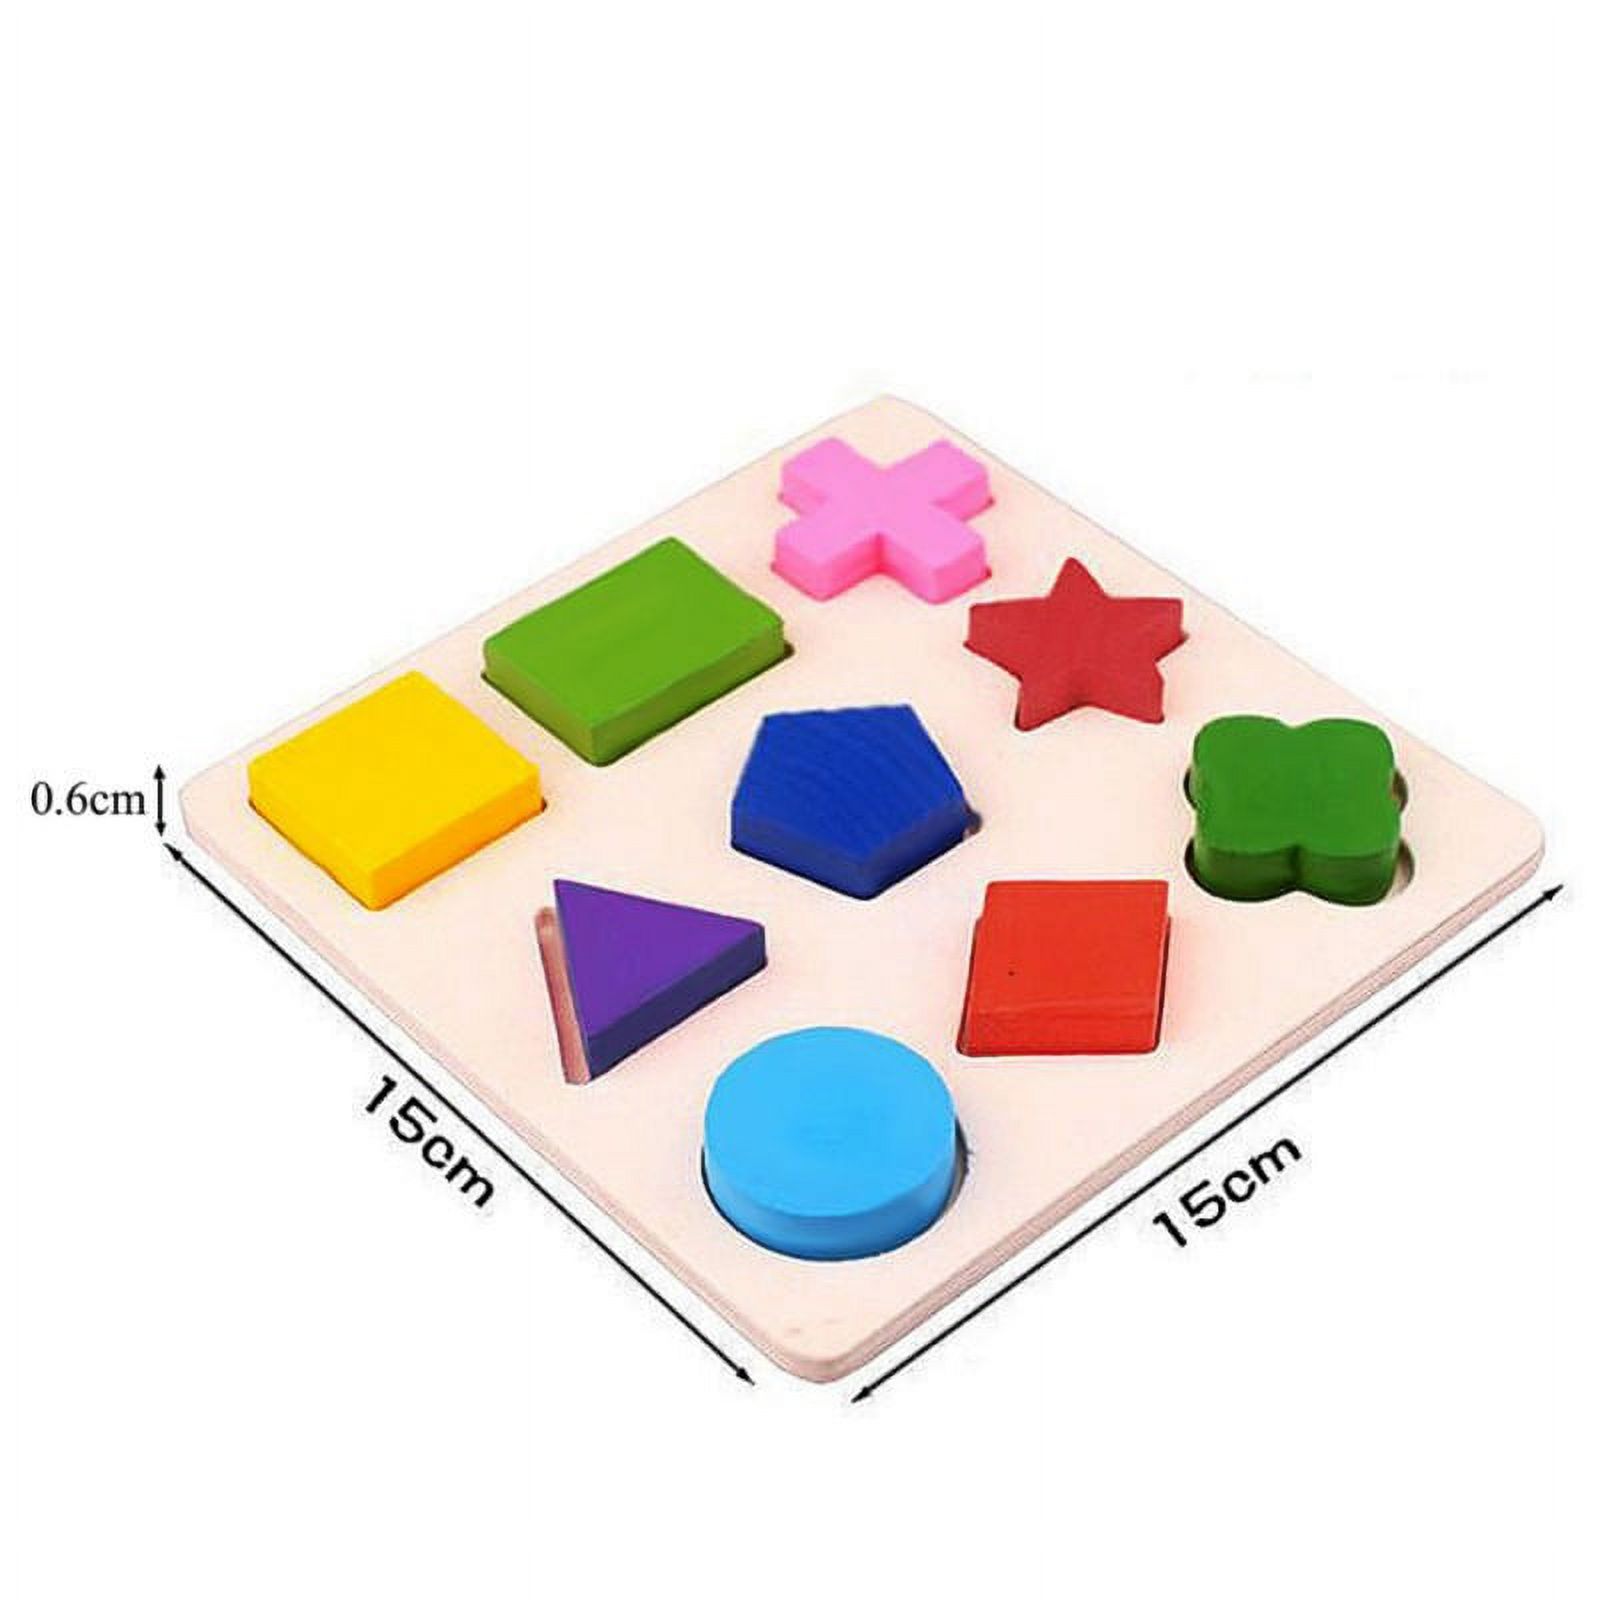 Kids Baby Wooden Geometry Block Puzzle Montessori Early Learning Educational Toy - image 2 of 5